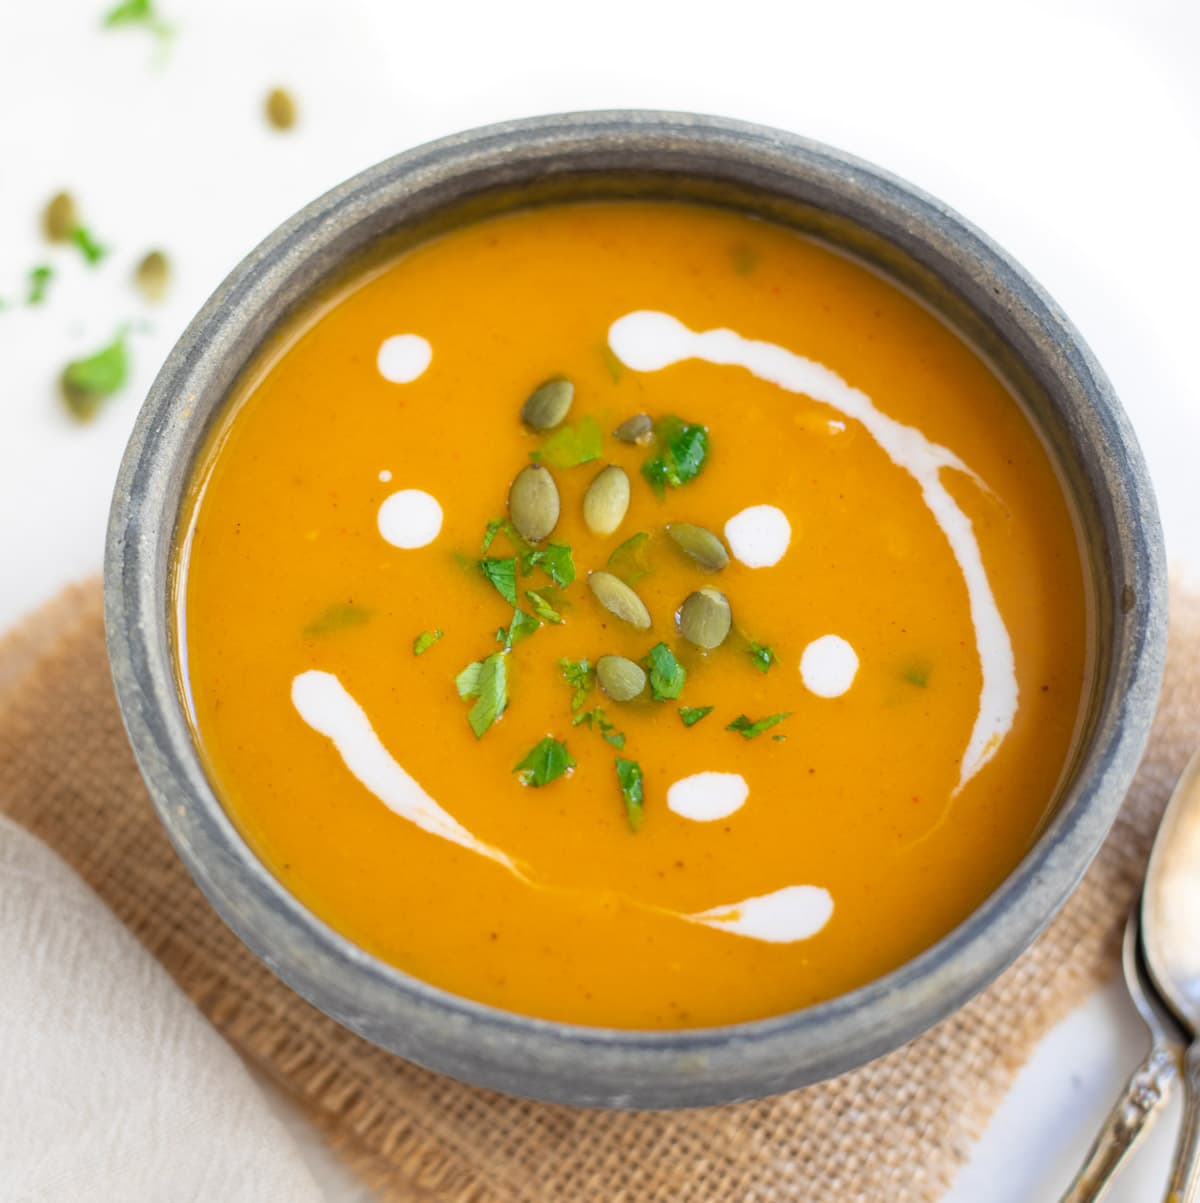 Creamy Sweet potato soup garnished with pepitas and cream in a bowl